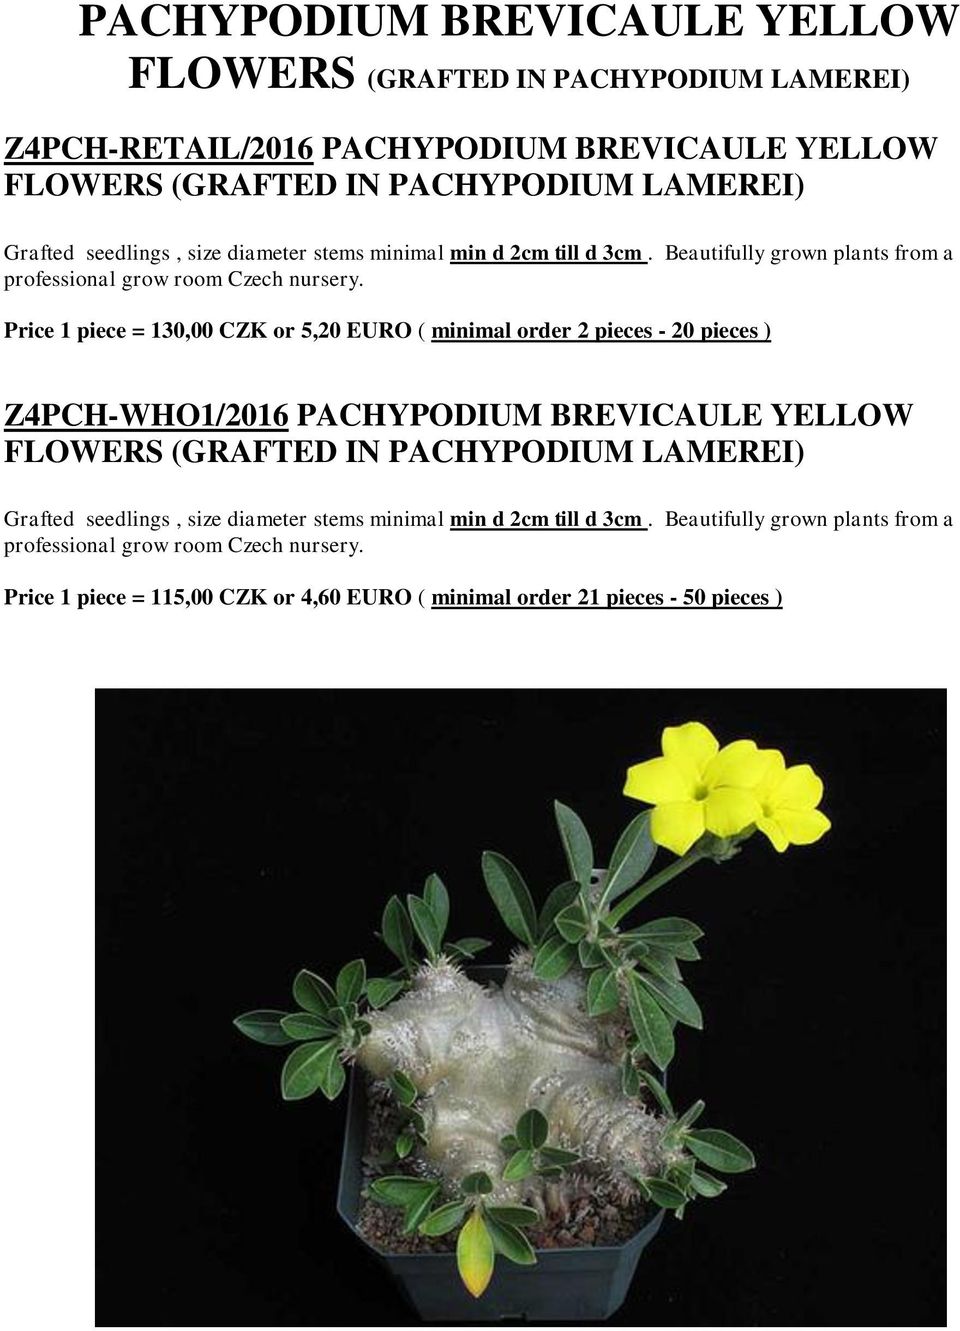 minimal order 2 pieces - 20 pieces ) Z4PCH-WHO1/2016 PACHYPODIUM BREVICAULE YELLOW FLOWERS (GRAFTED